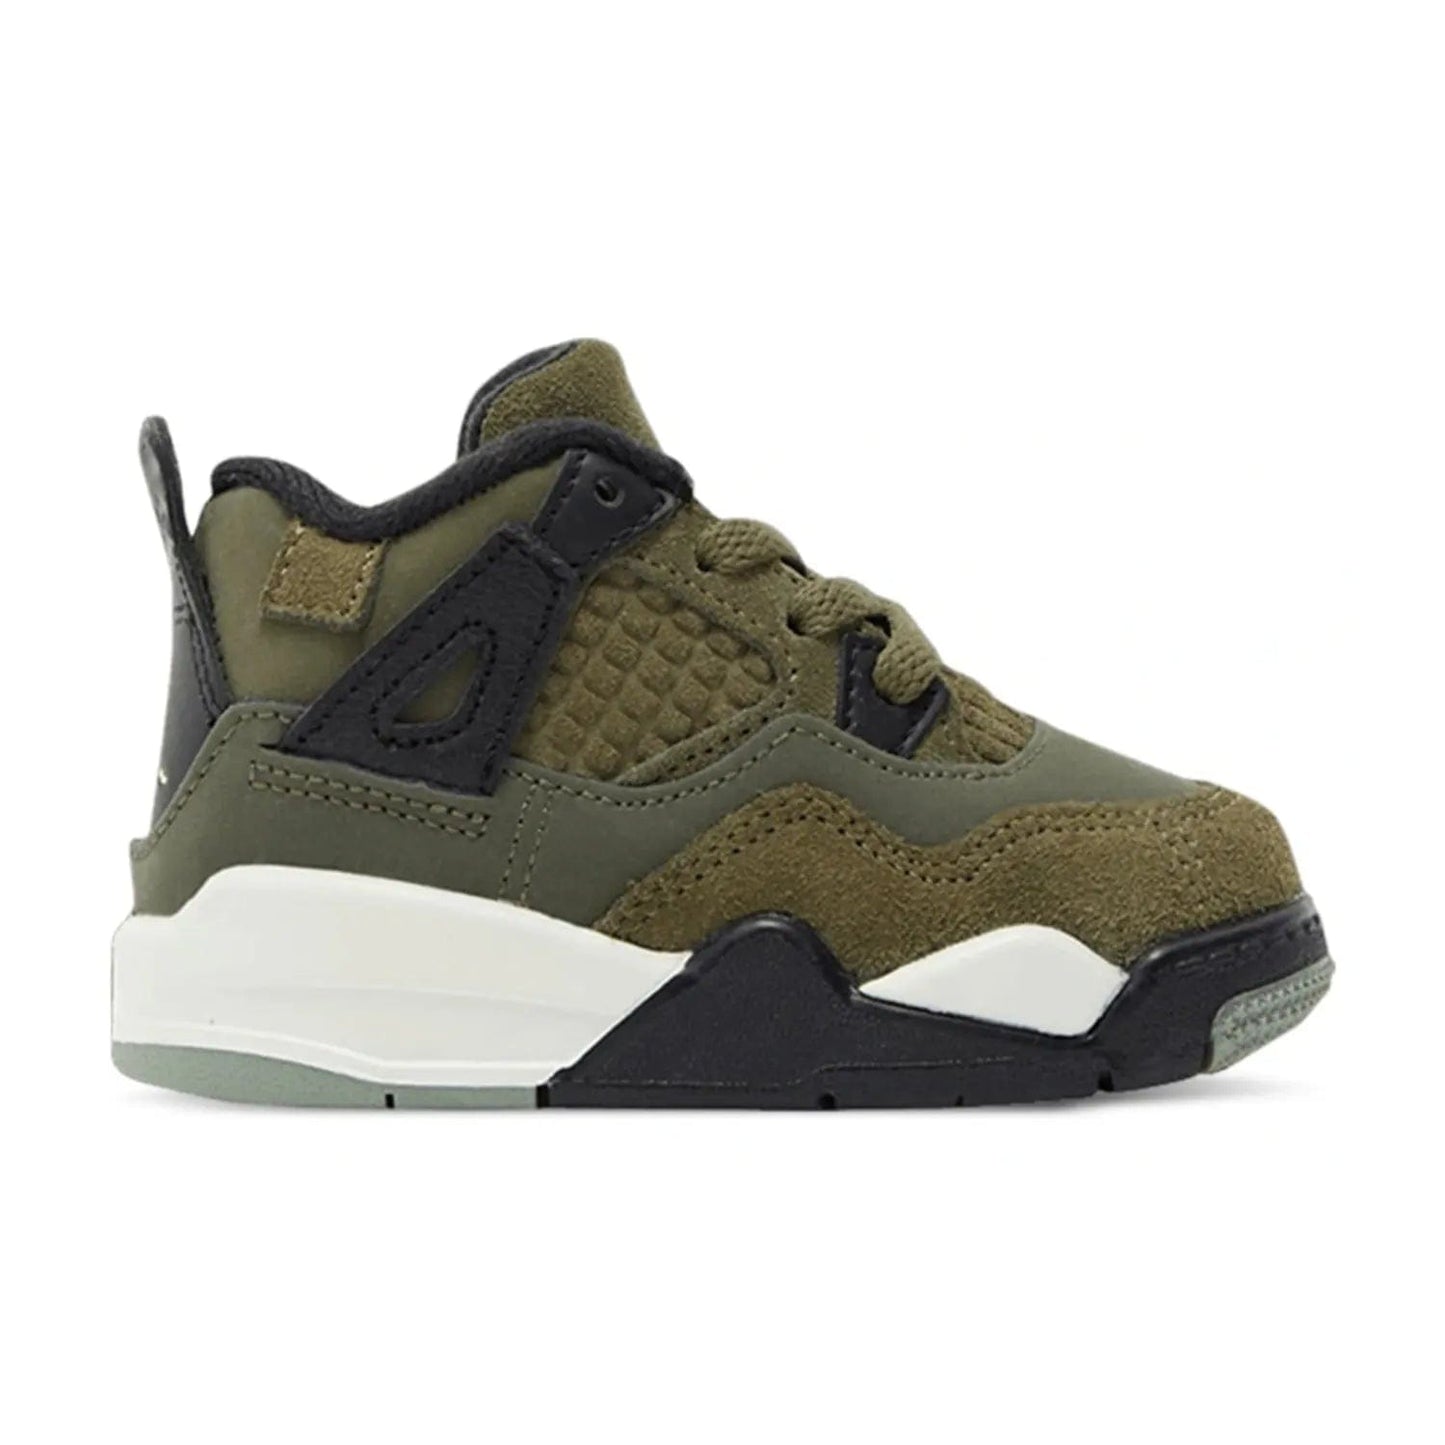 Jordan 4 Retro SE Craft Medium Olive (TD) - Image 1 - Only at www.BallersClubKickz.com - Classic Jordan 4 Retro SE Craft Medium Olive sneaker. Features sleek design, unique colorway of Medium Olive, Pale Vanilla, Khaki, Black & Sail. Perfect for everyday wear. Shop and complete your collection today!